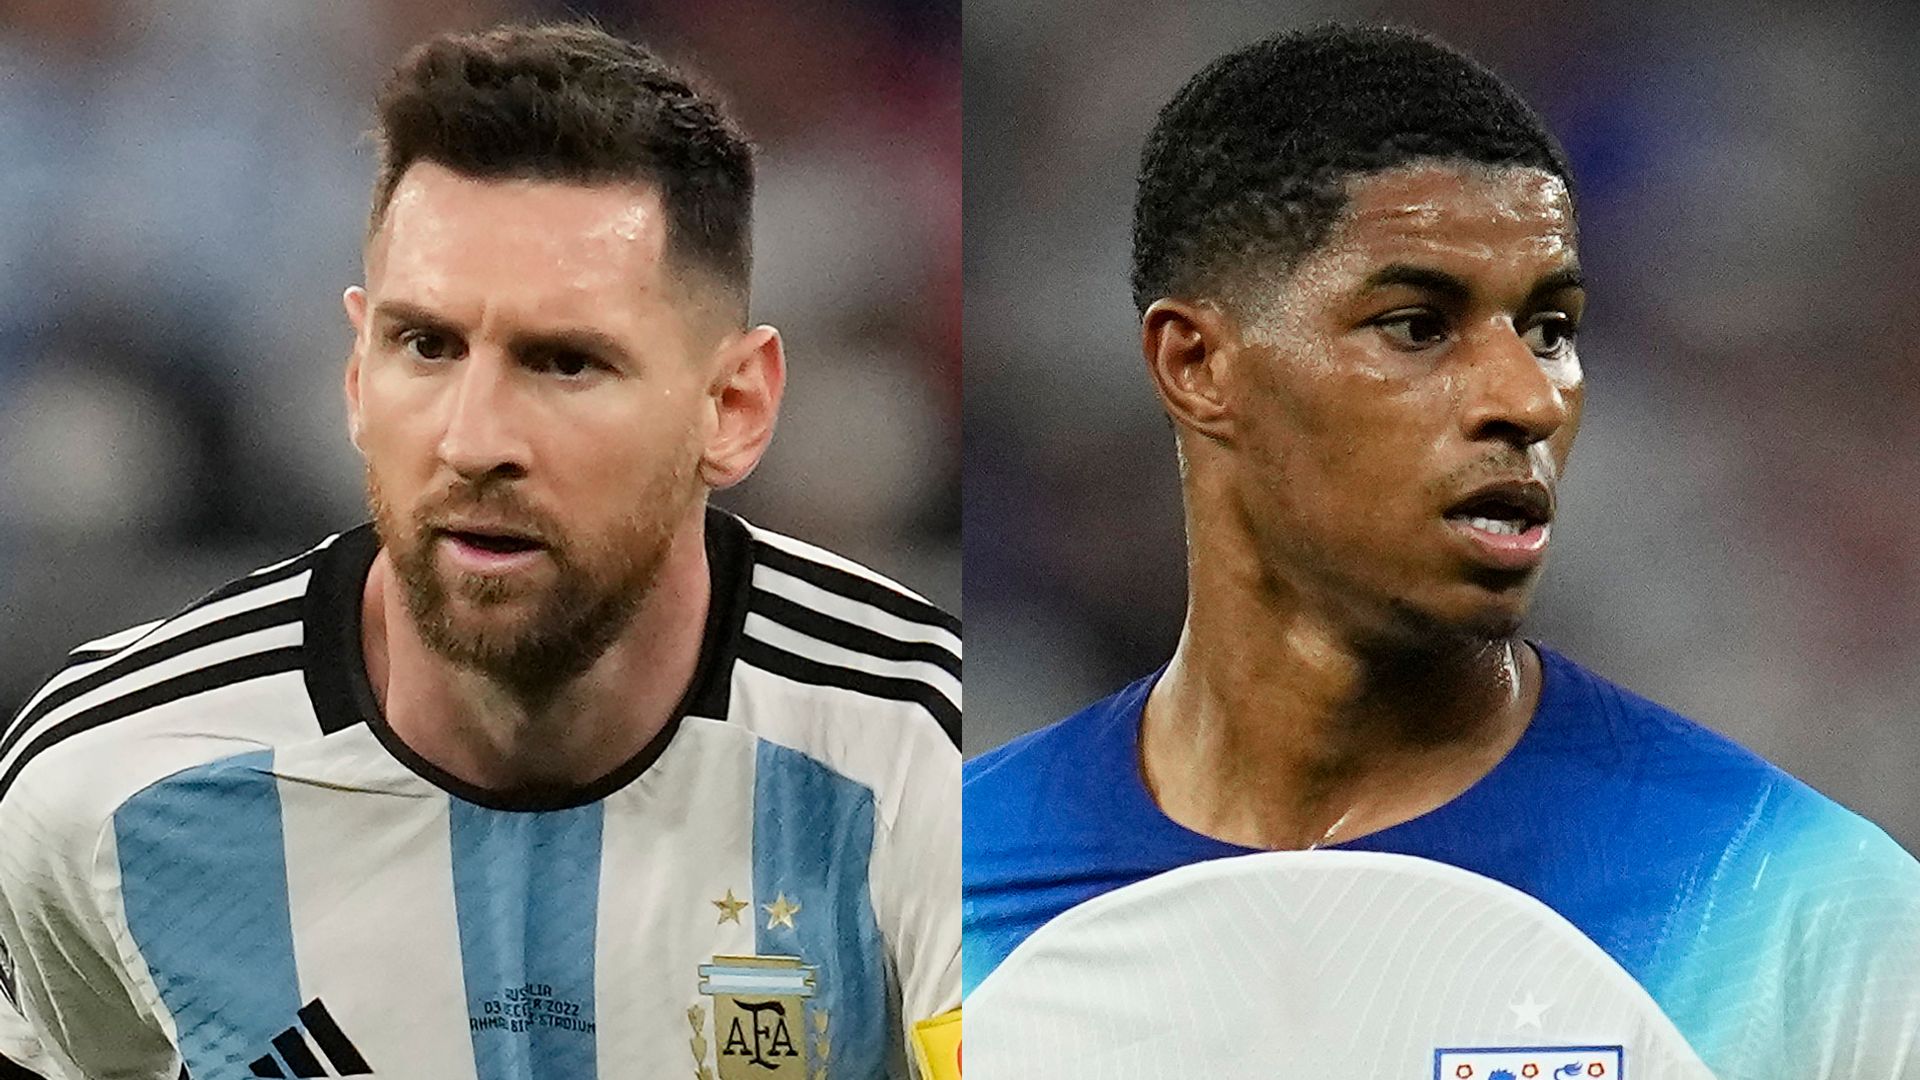 PSG president: Messi happy in Paris | Rashford for free in the summer? Why not?